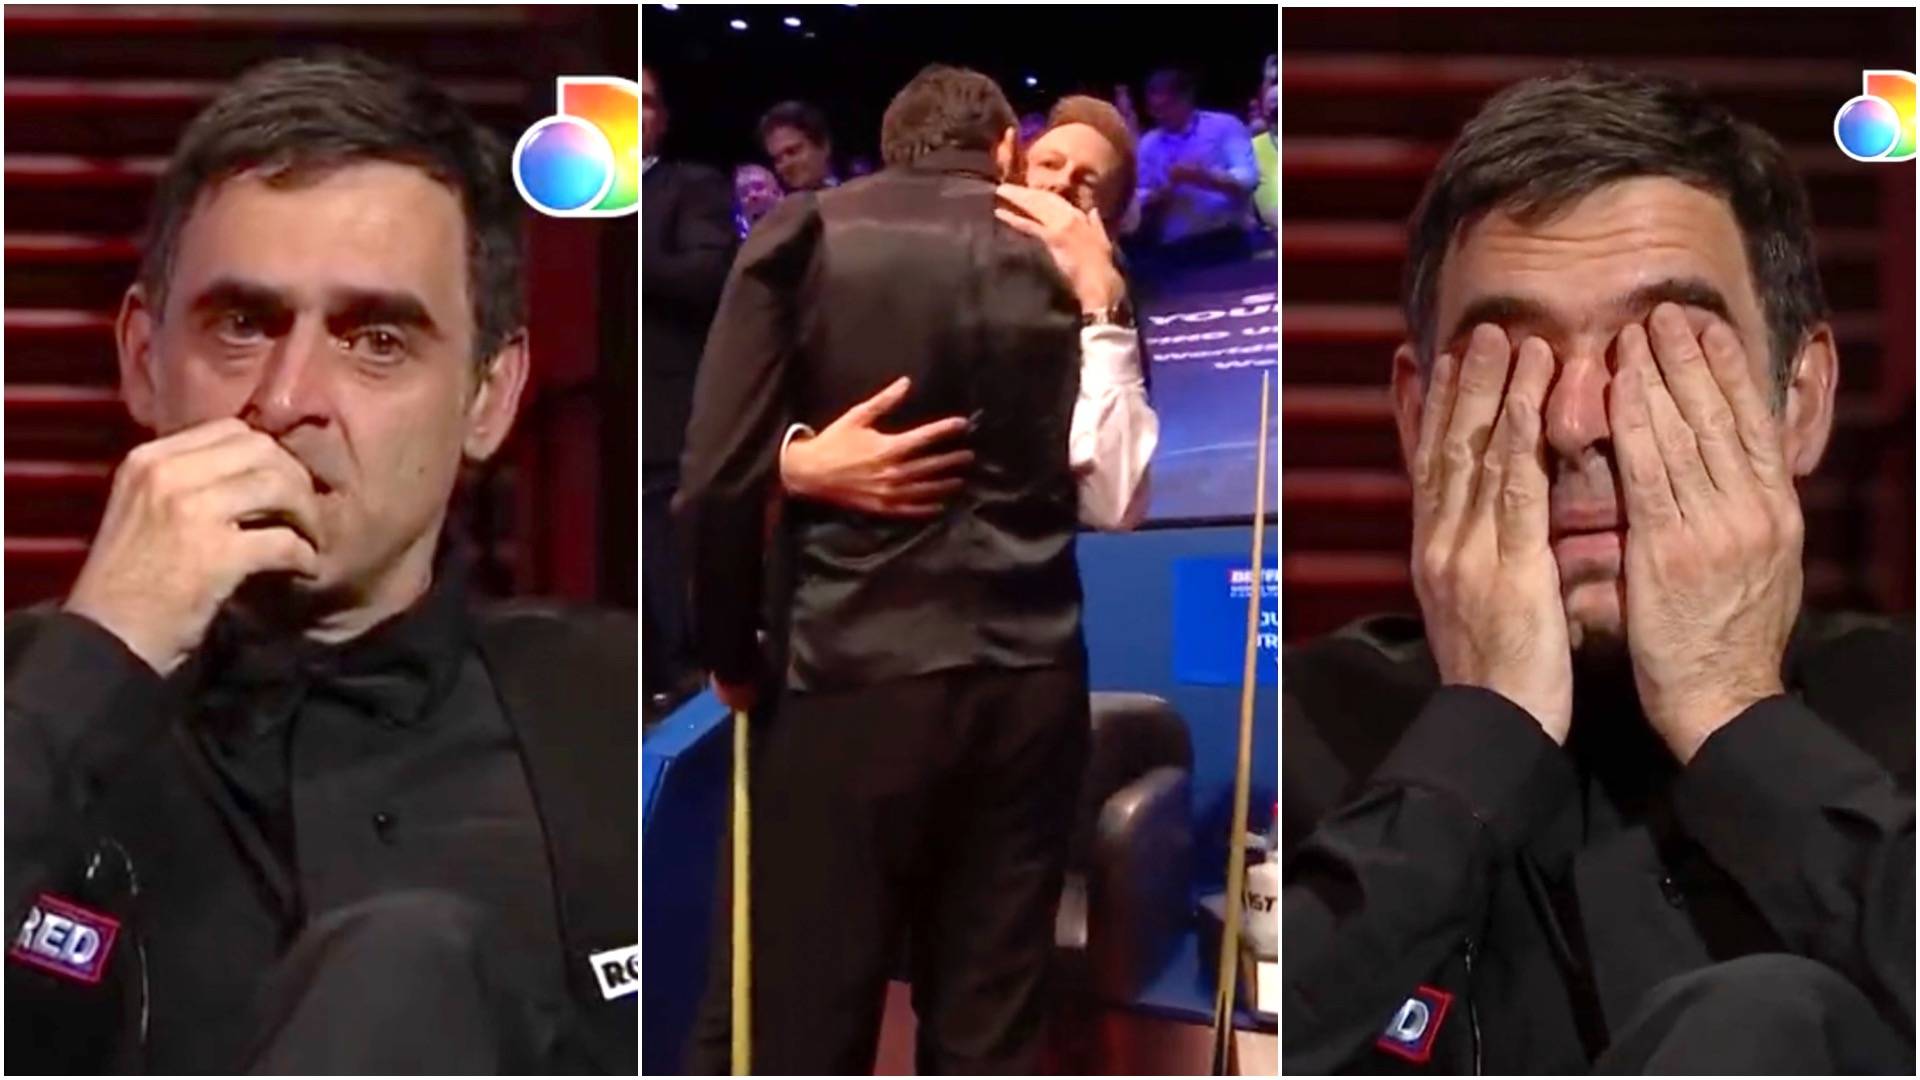 Ronnie O’Sullivan moved to tears in emotional interview following beautiful moment with Judd Trump